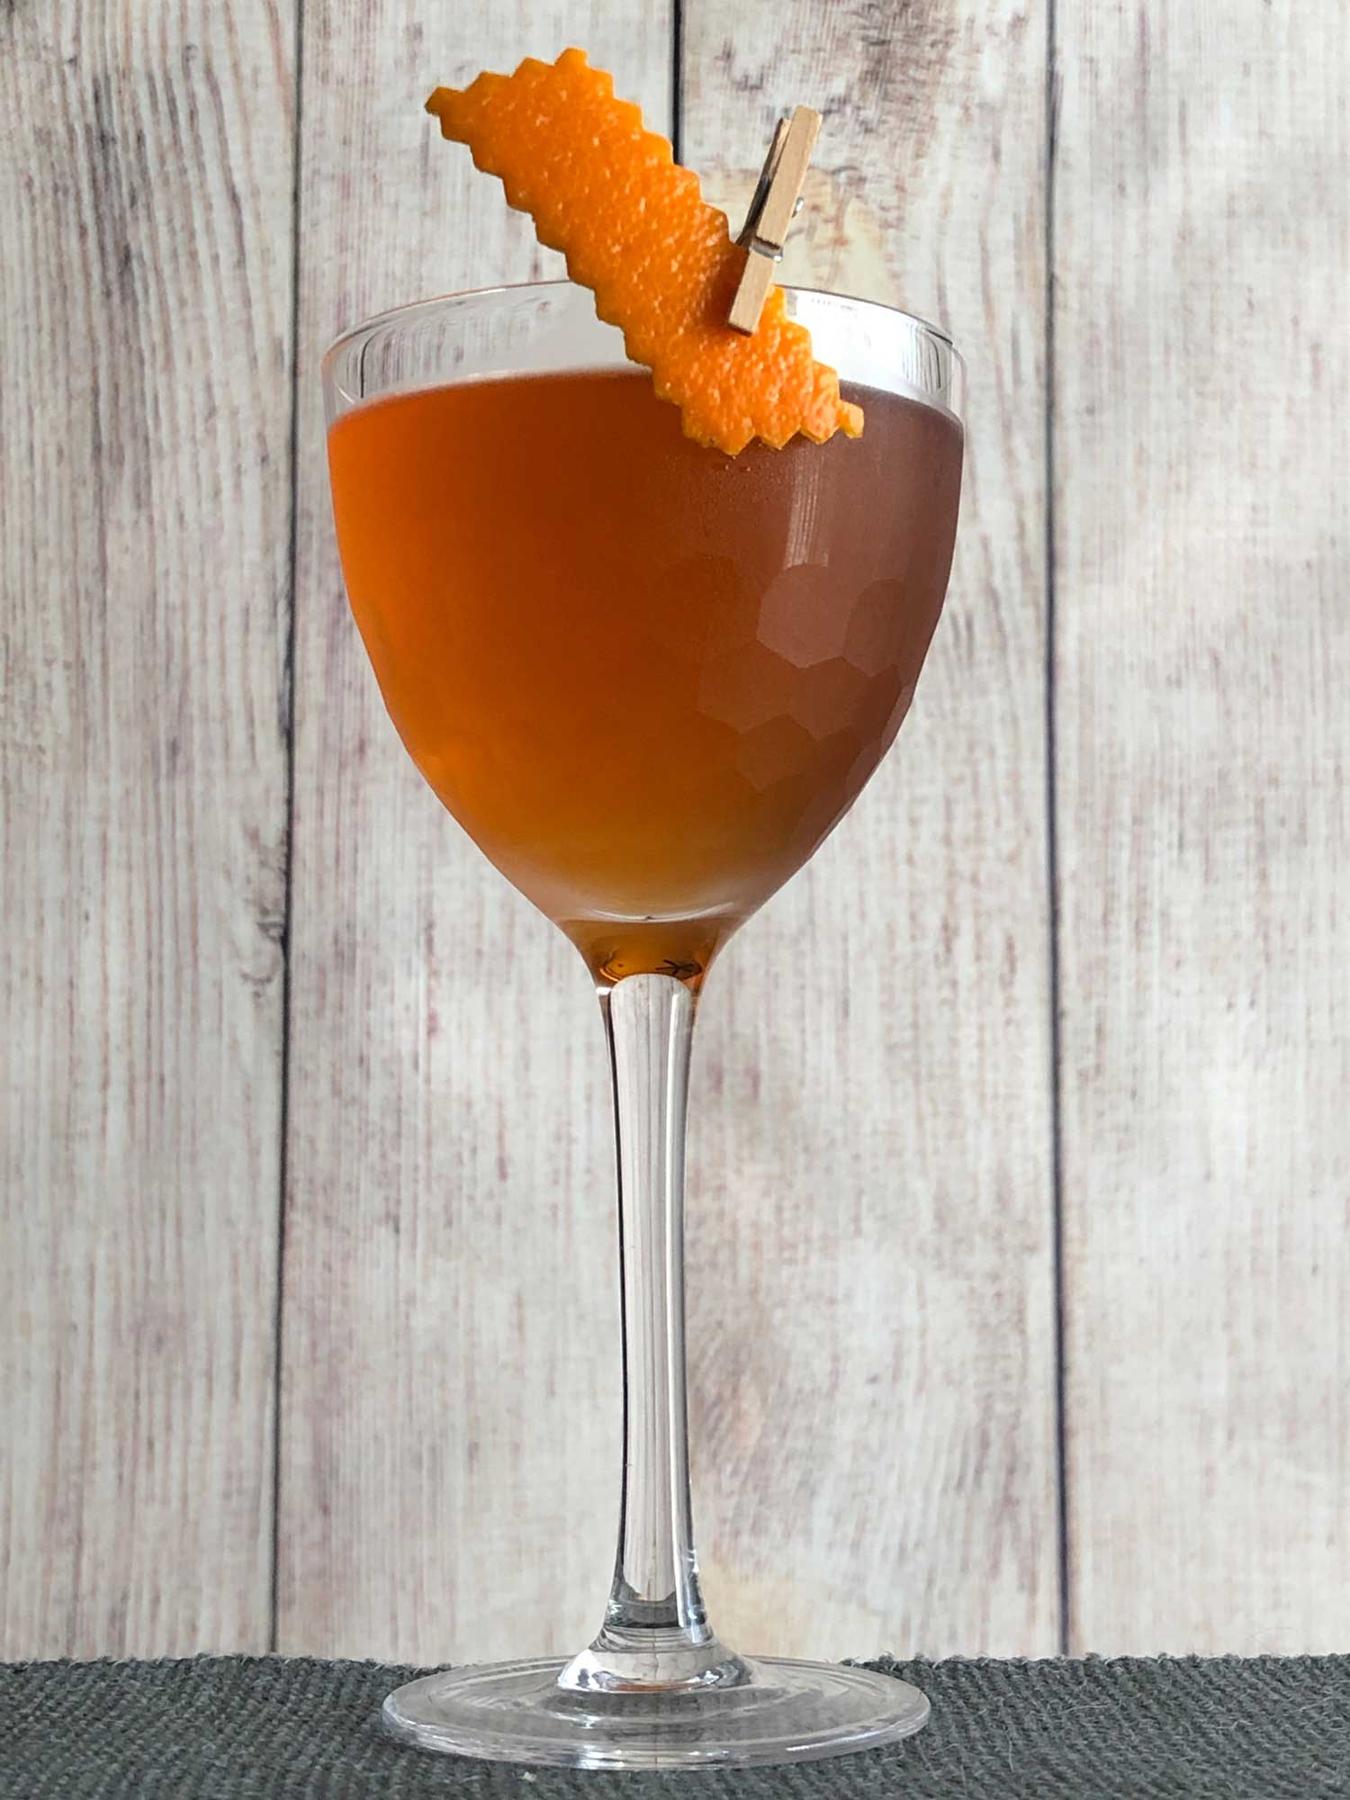 An example of the Overtime Cocktail, the mixed drink (drink), by based on the Coin Toss, Death & Co, New York City, featuring The Scarlet Ibis Trinidad Rum, Cocchi Vermouth di Torino ‘Storico’, Dolin Génépy le Chamois Liqueur, Bénédictine, Peychaud’s Aromatic Cocktail Bitters, and orange twist; photo by Lee Edwards